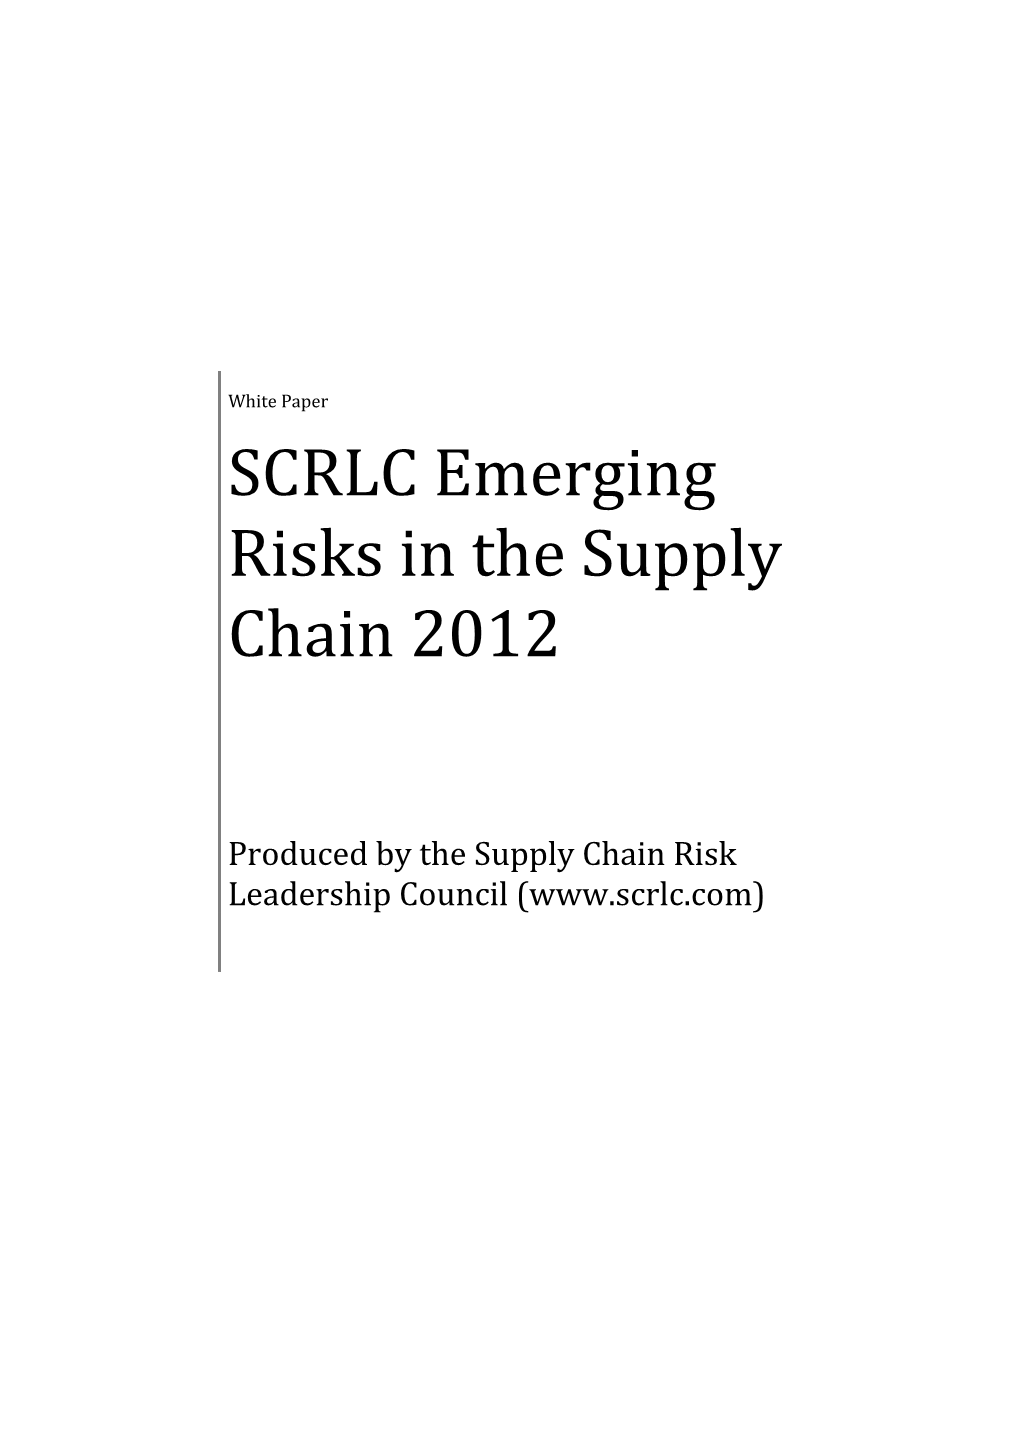 SCRLC Emerging Risks in the Supply Chain 2012